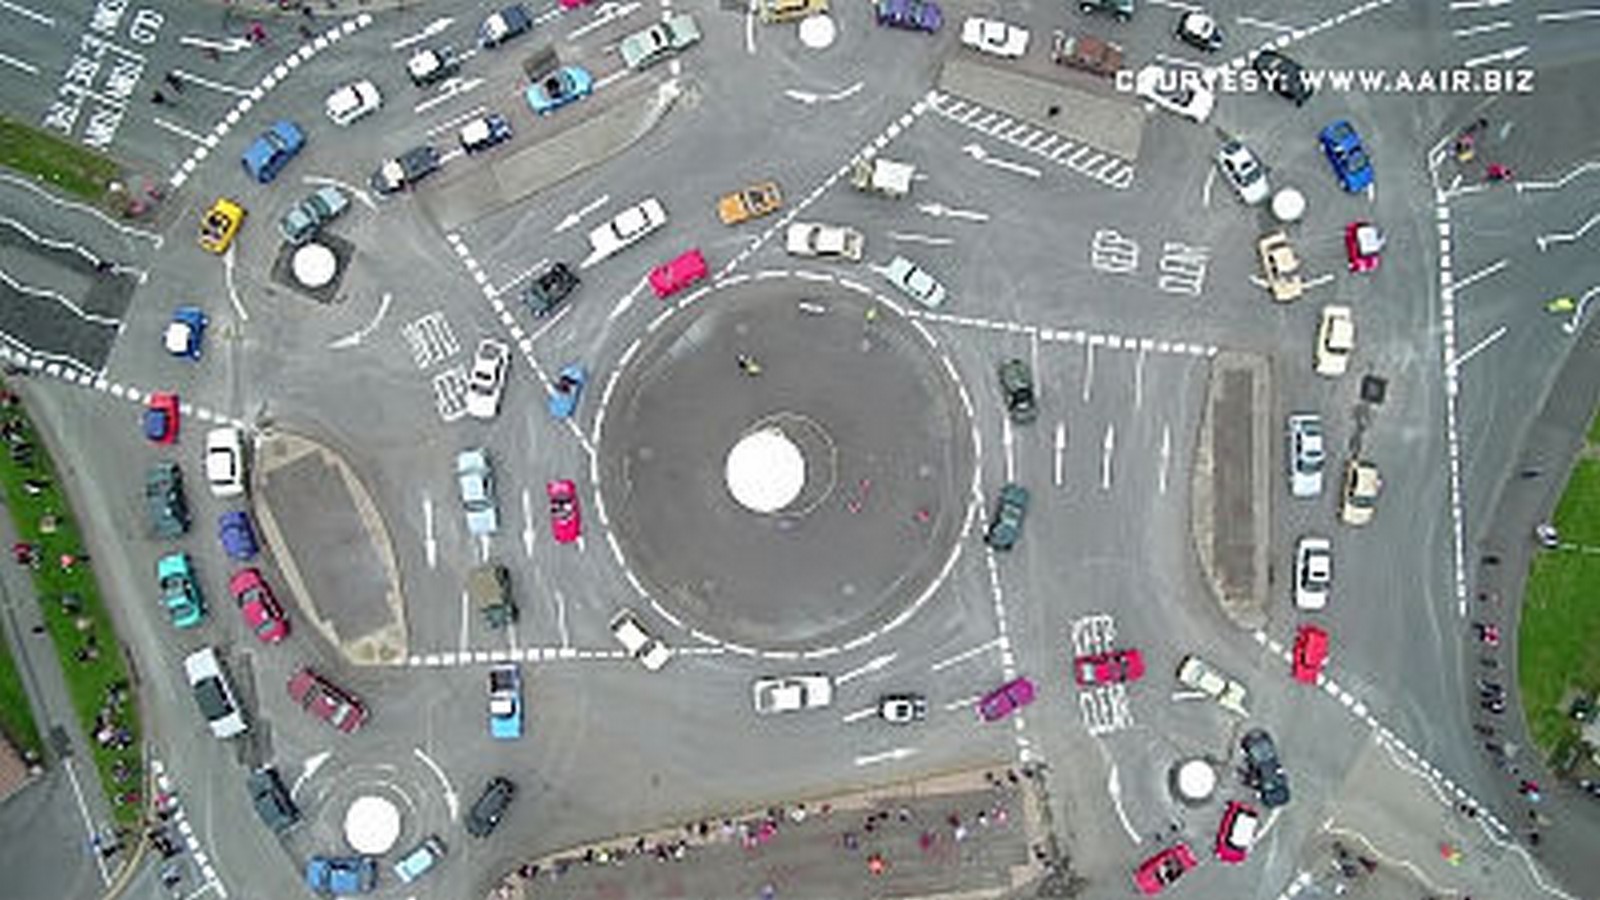 A4930-10-biggest-roundabouts-in-the-world-Image-11.jpg